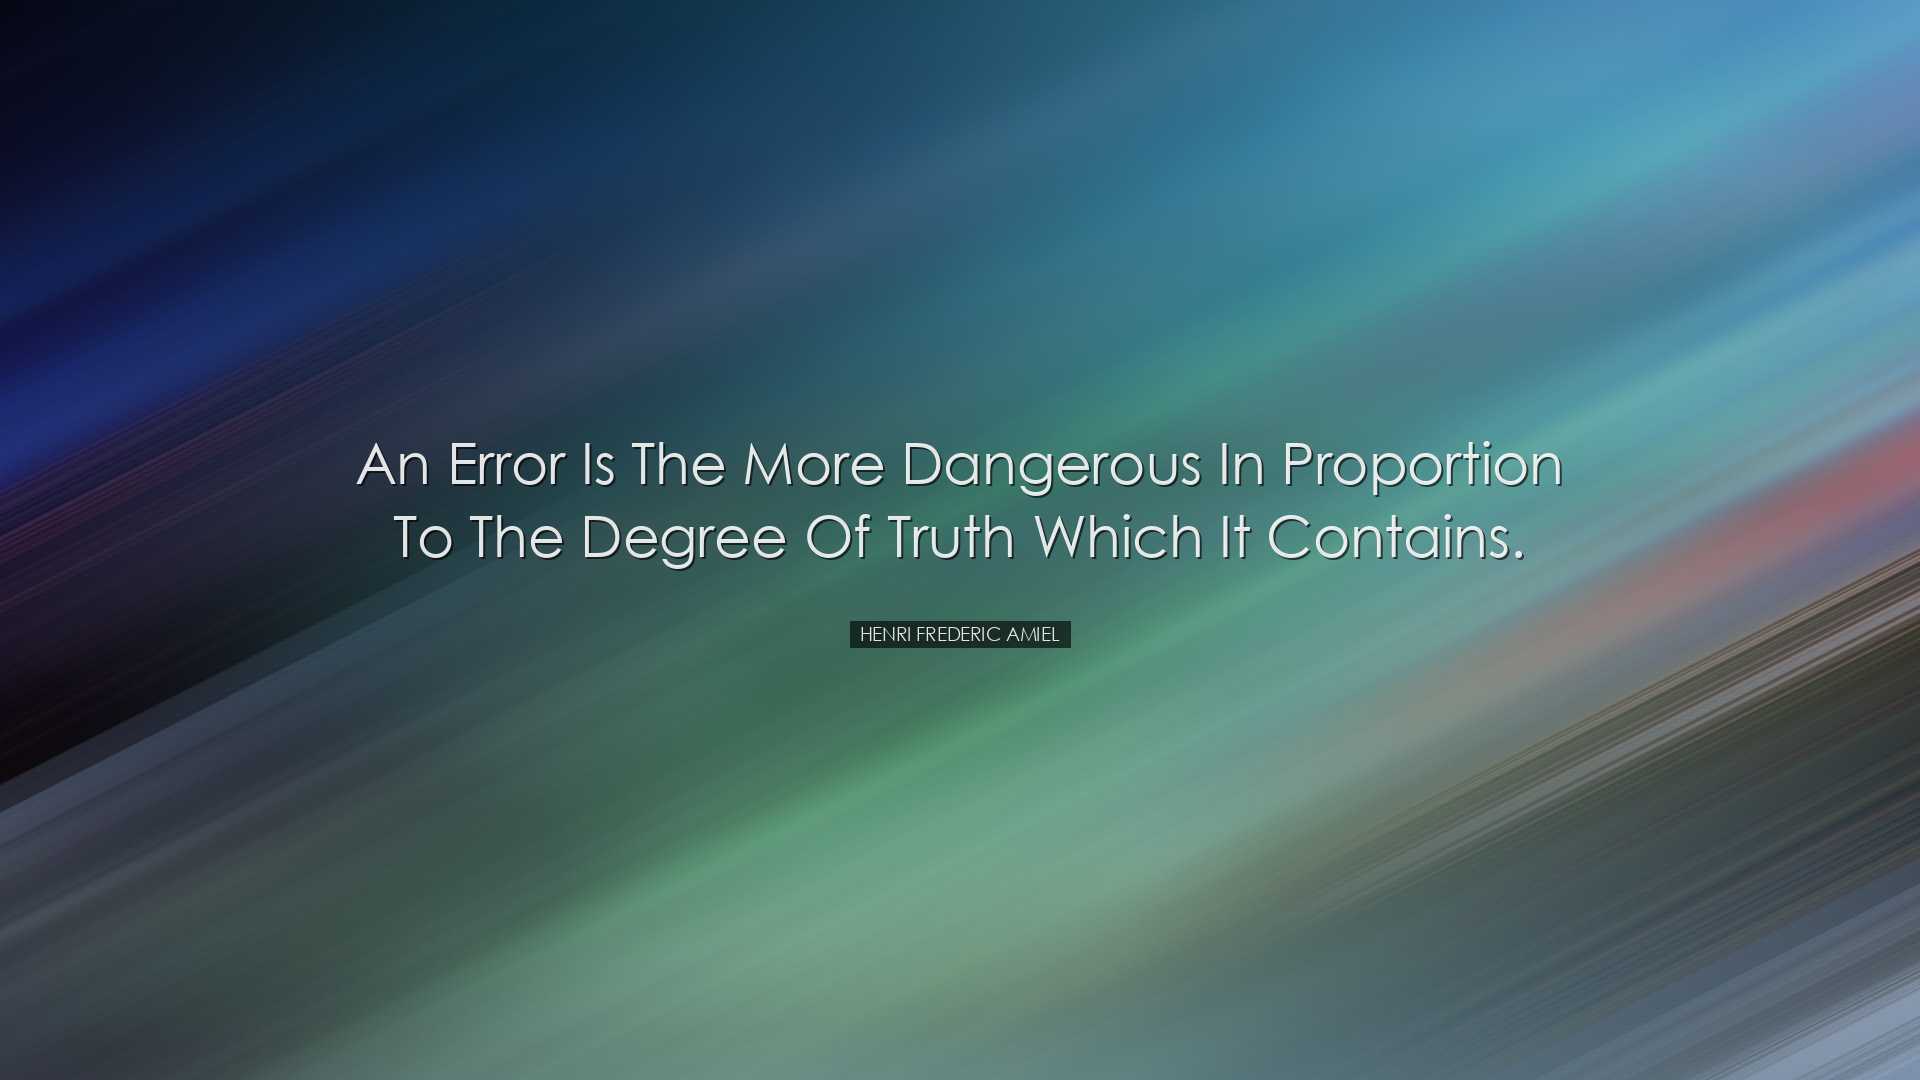 An error is the more dangerous in proportion to the degree of trut